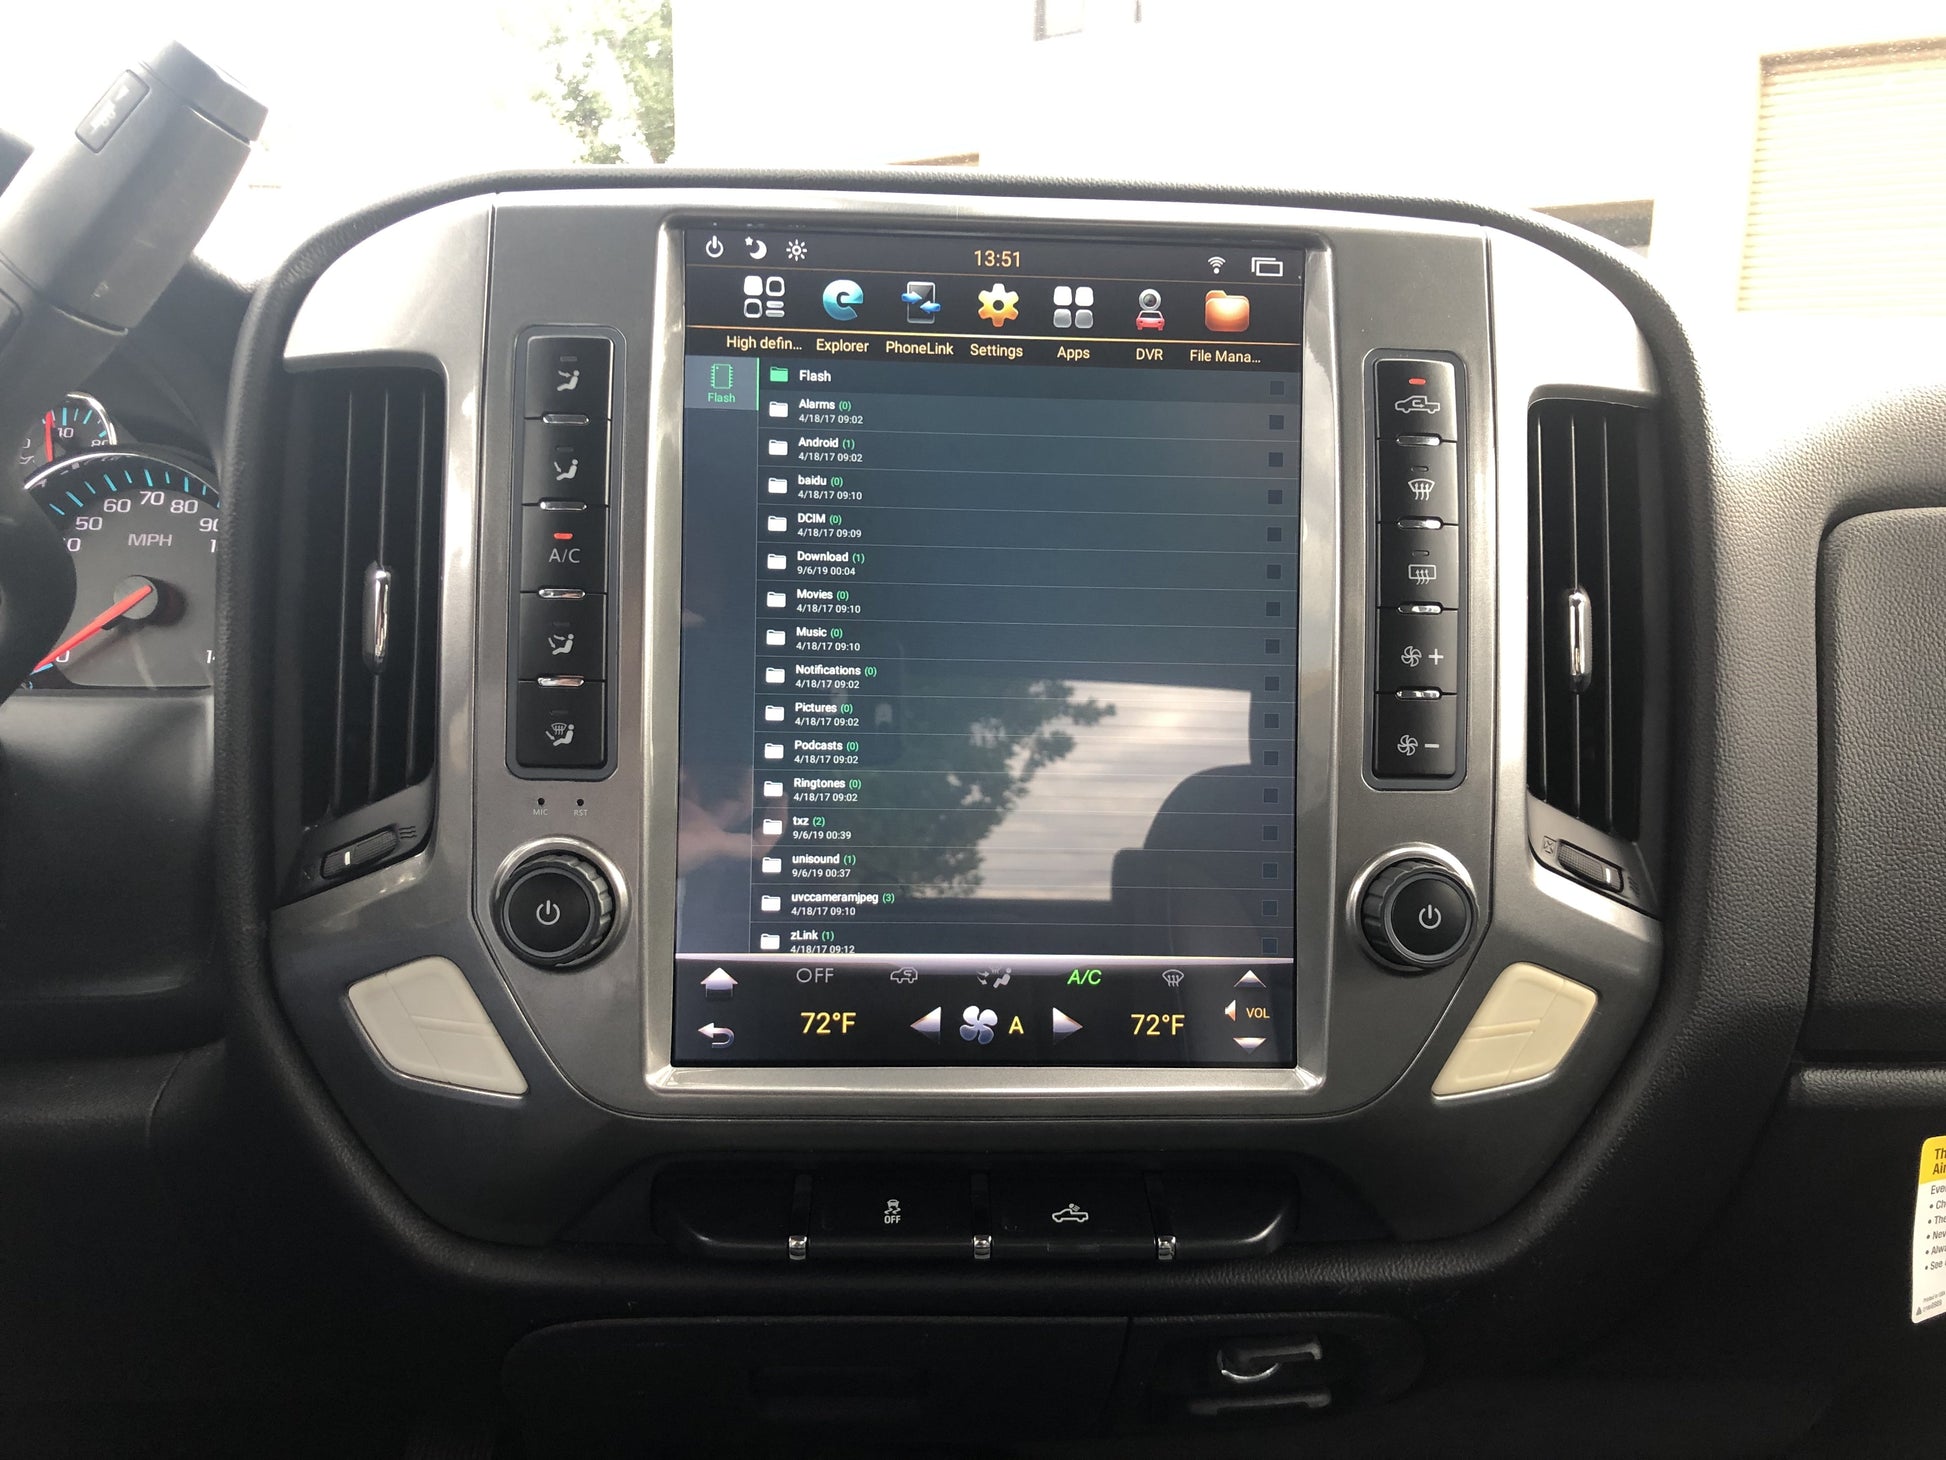 [PX6 SIX-CORE] [Special Edition] 12.1" Android 9 Fast boot Navi Radio for Chevy Silverado GMC SIERRA 2014 - 2019